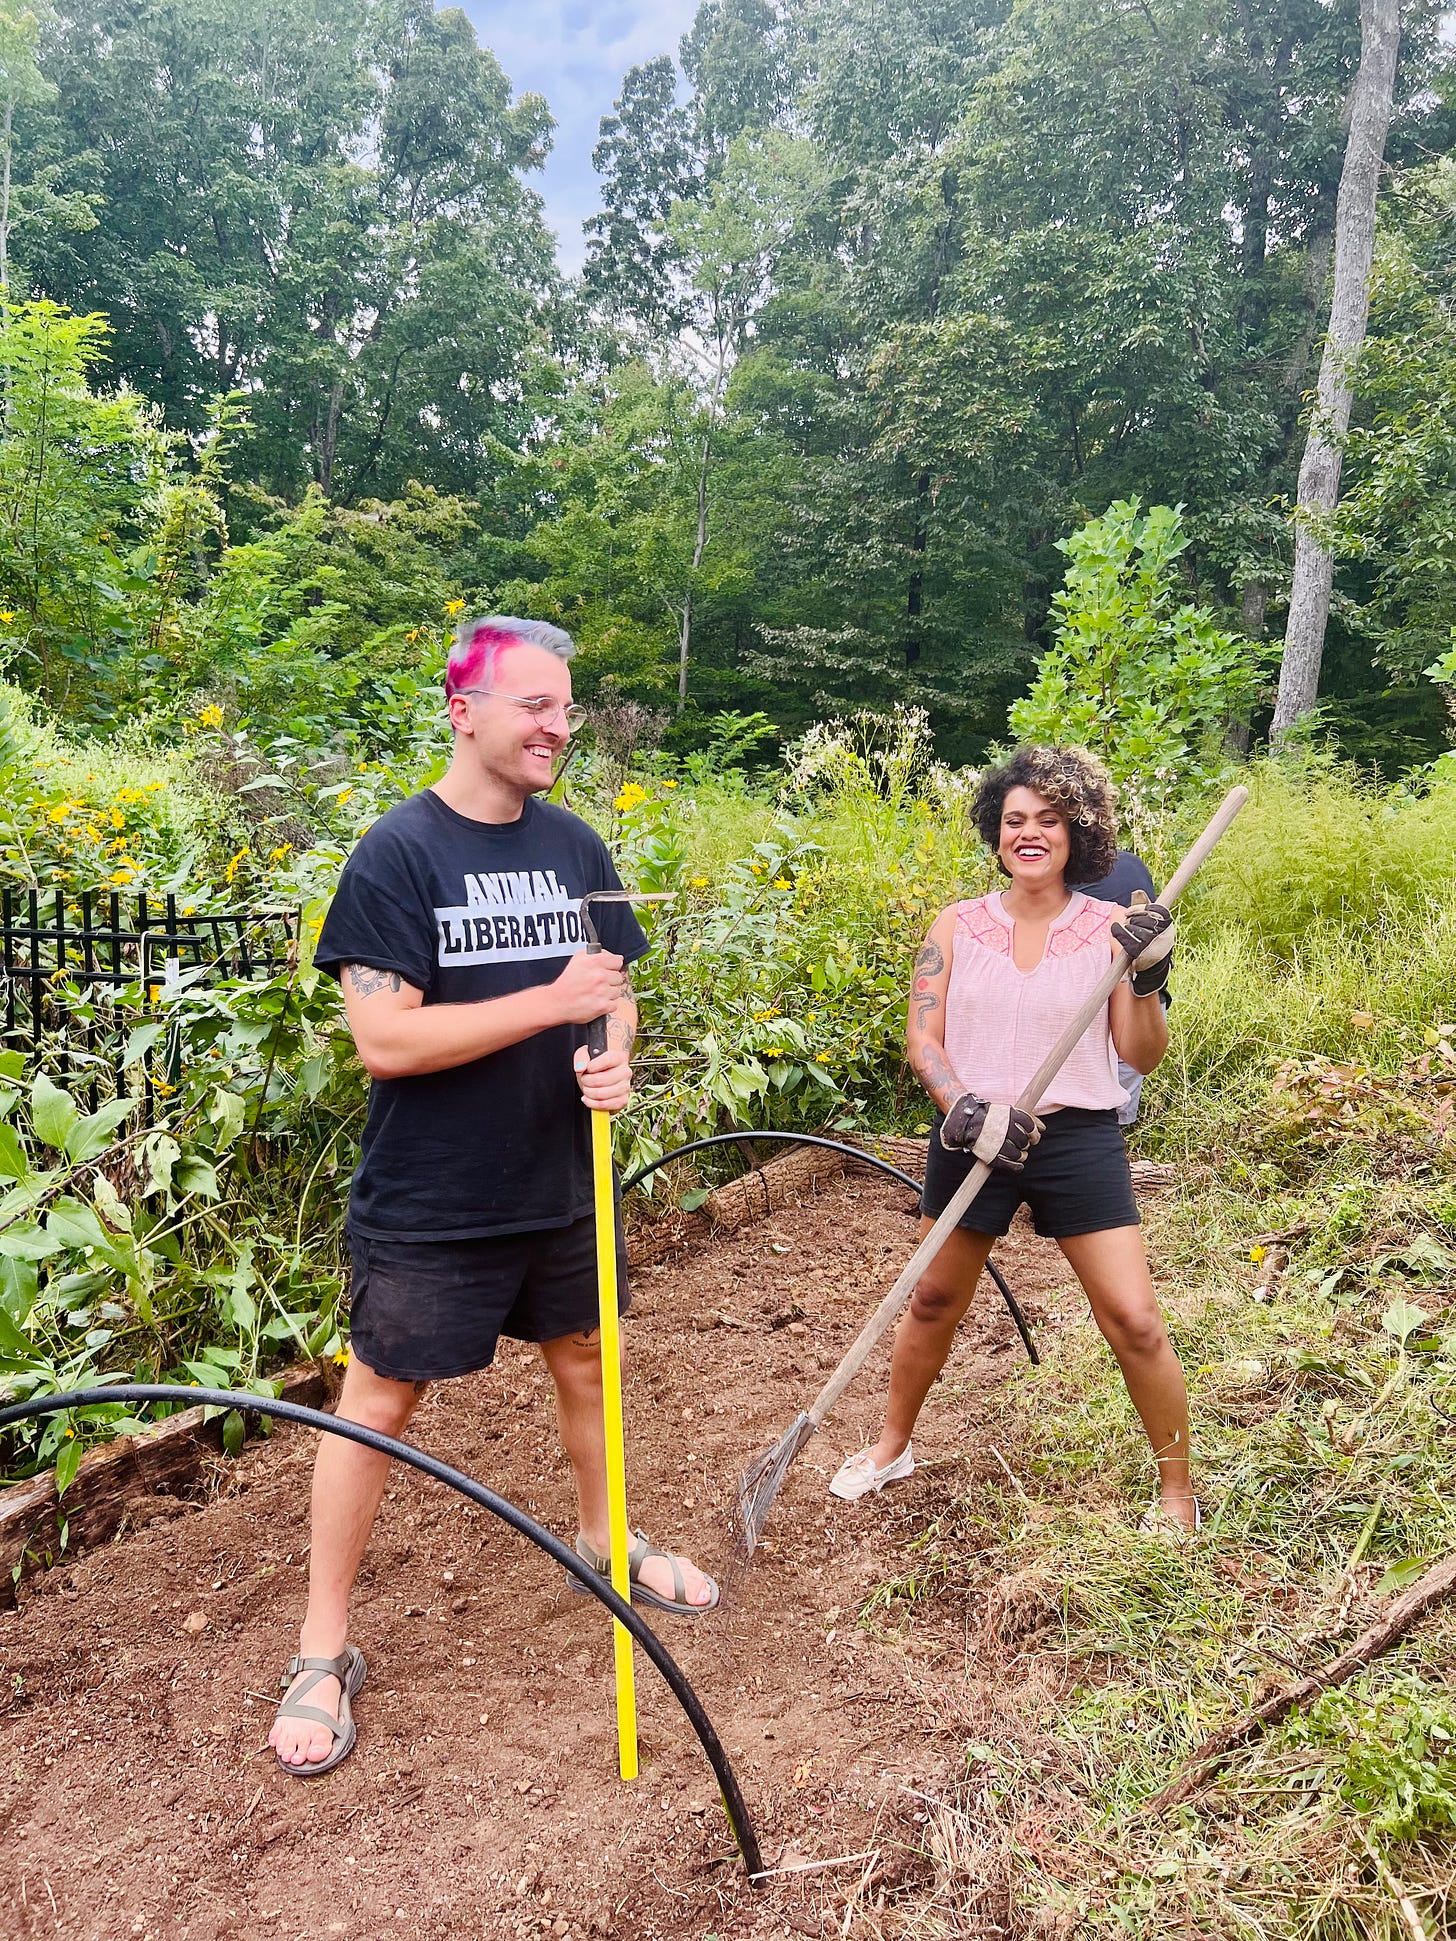 Ayesha and a friend plowing and prepping the garden soil bed to plant seeds in a sanctuary community farm on a mountain in Middle Tennessee.